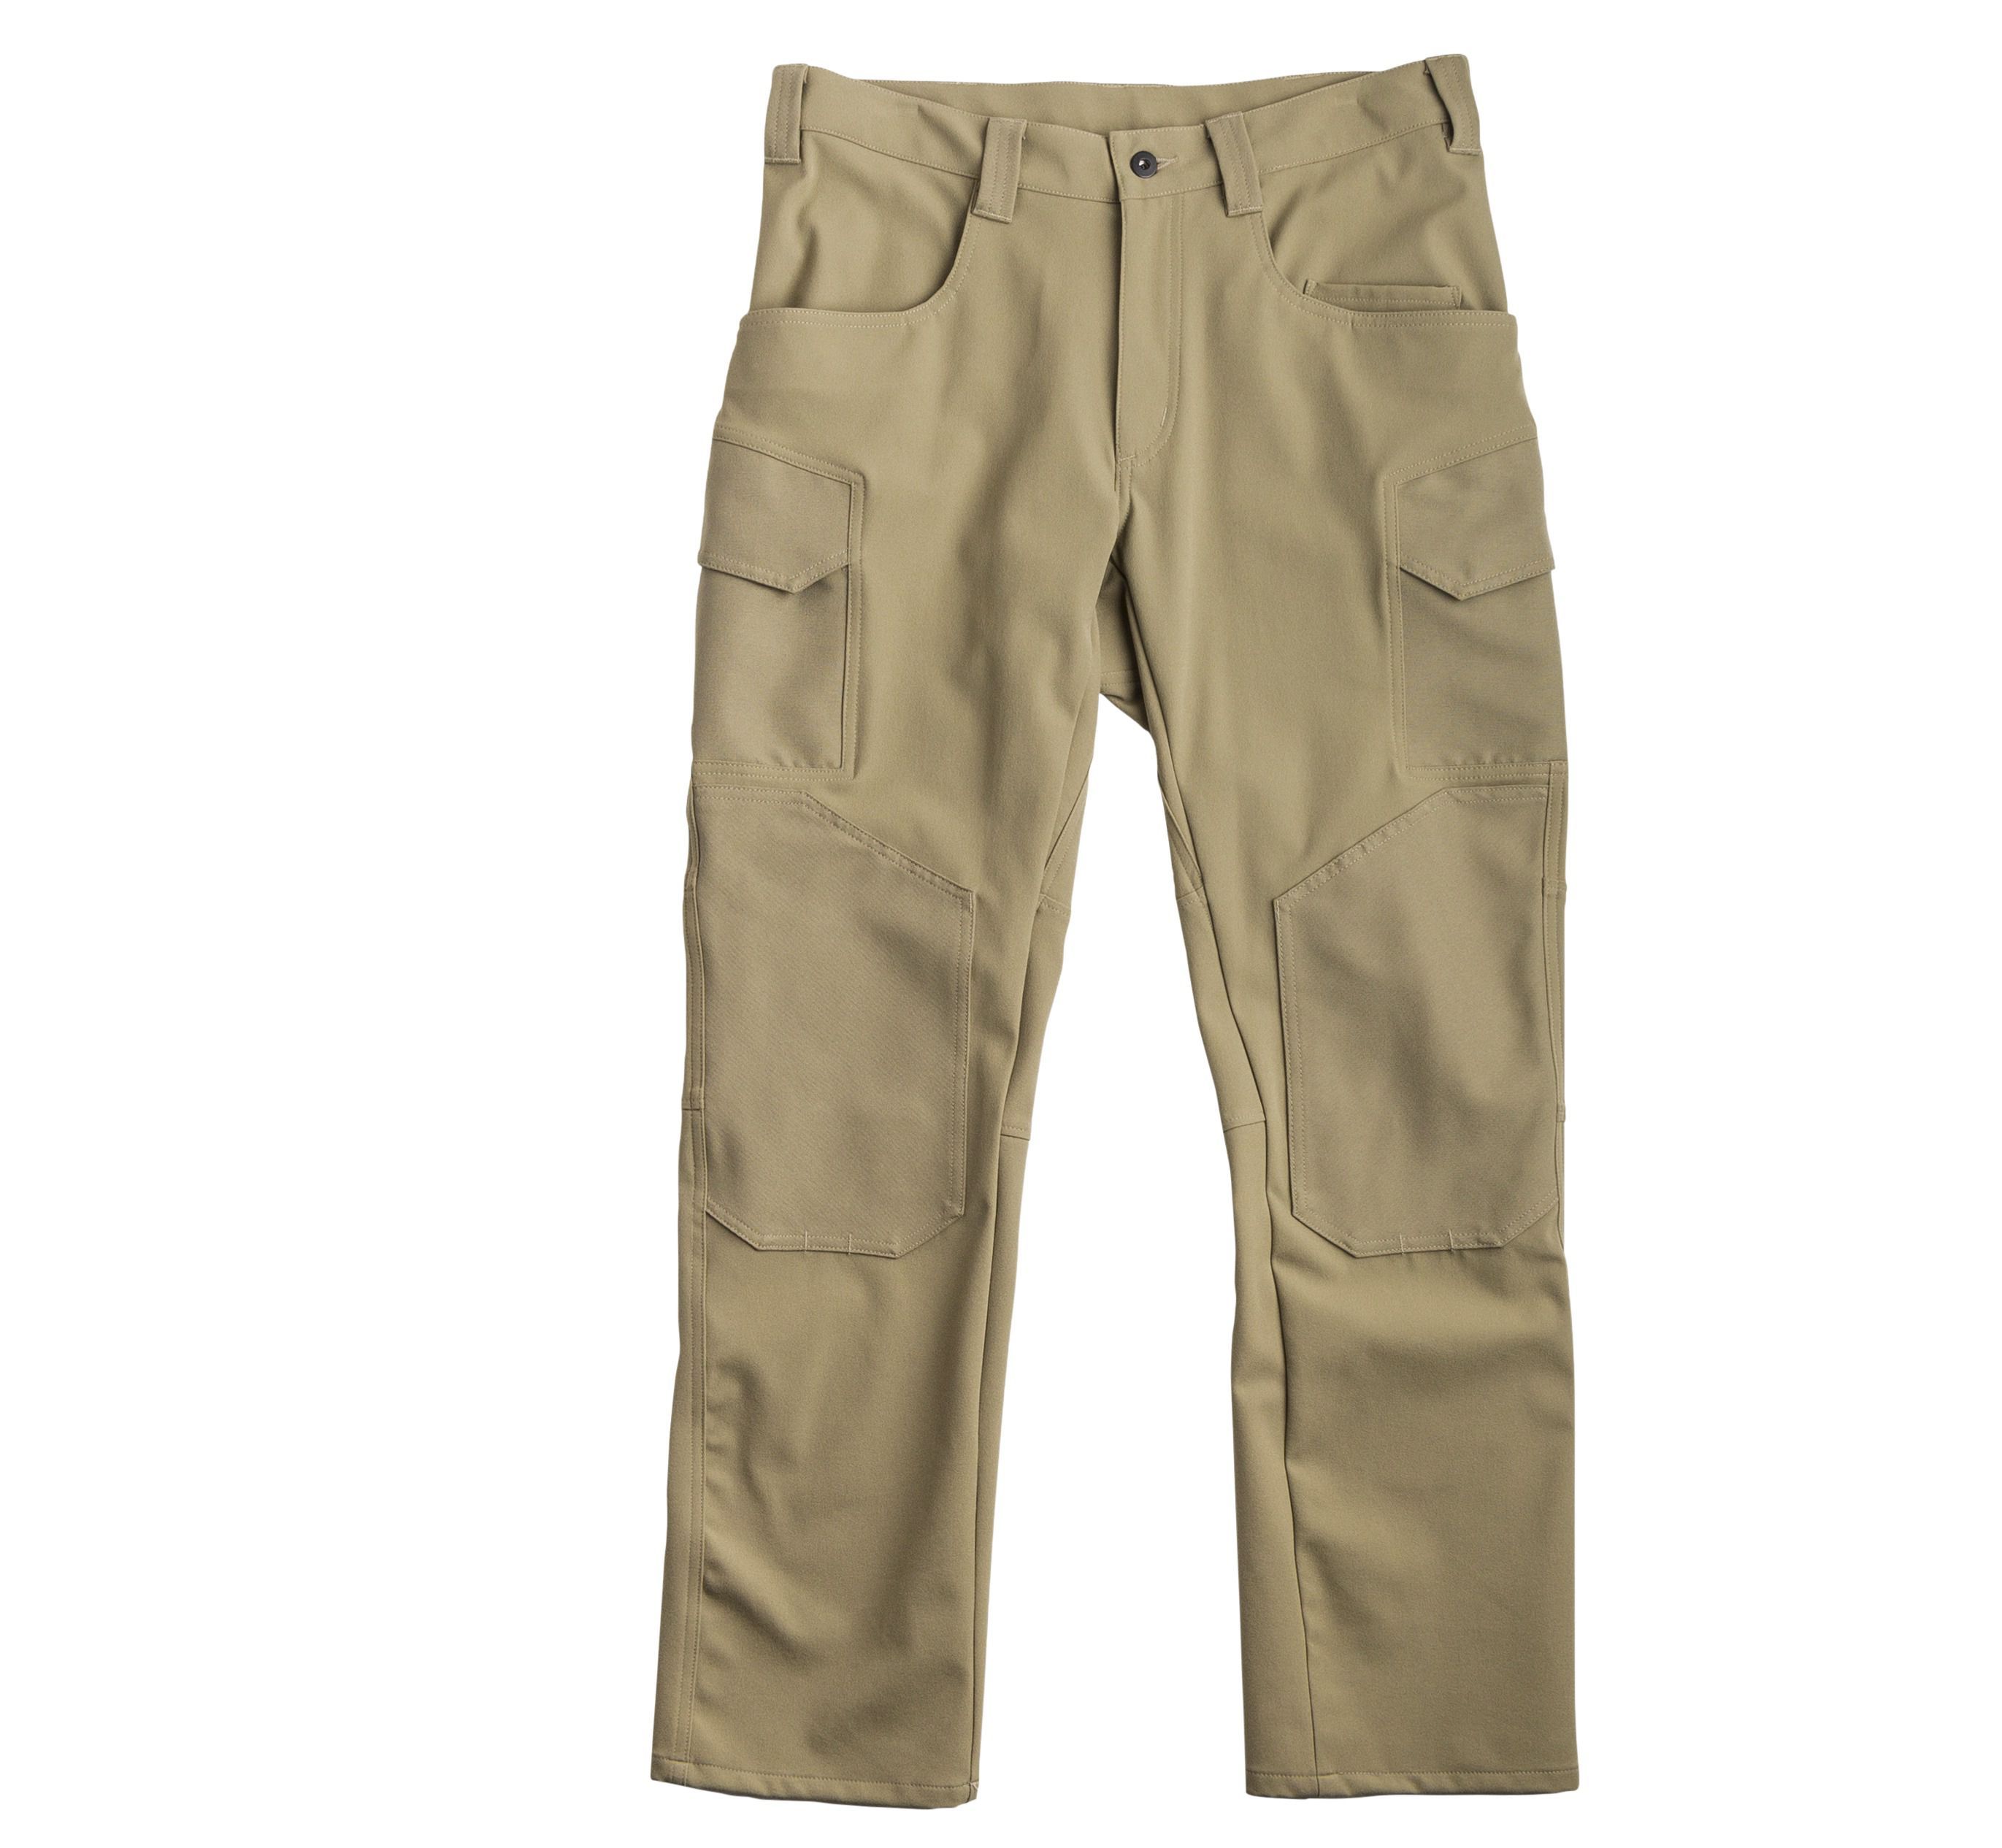 Stretch NYCO Double Knee Pant